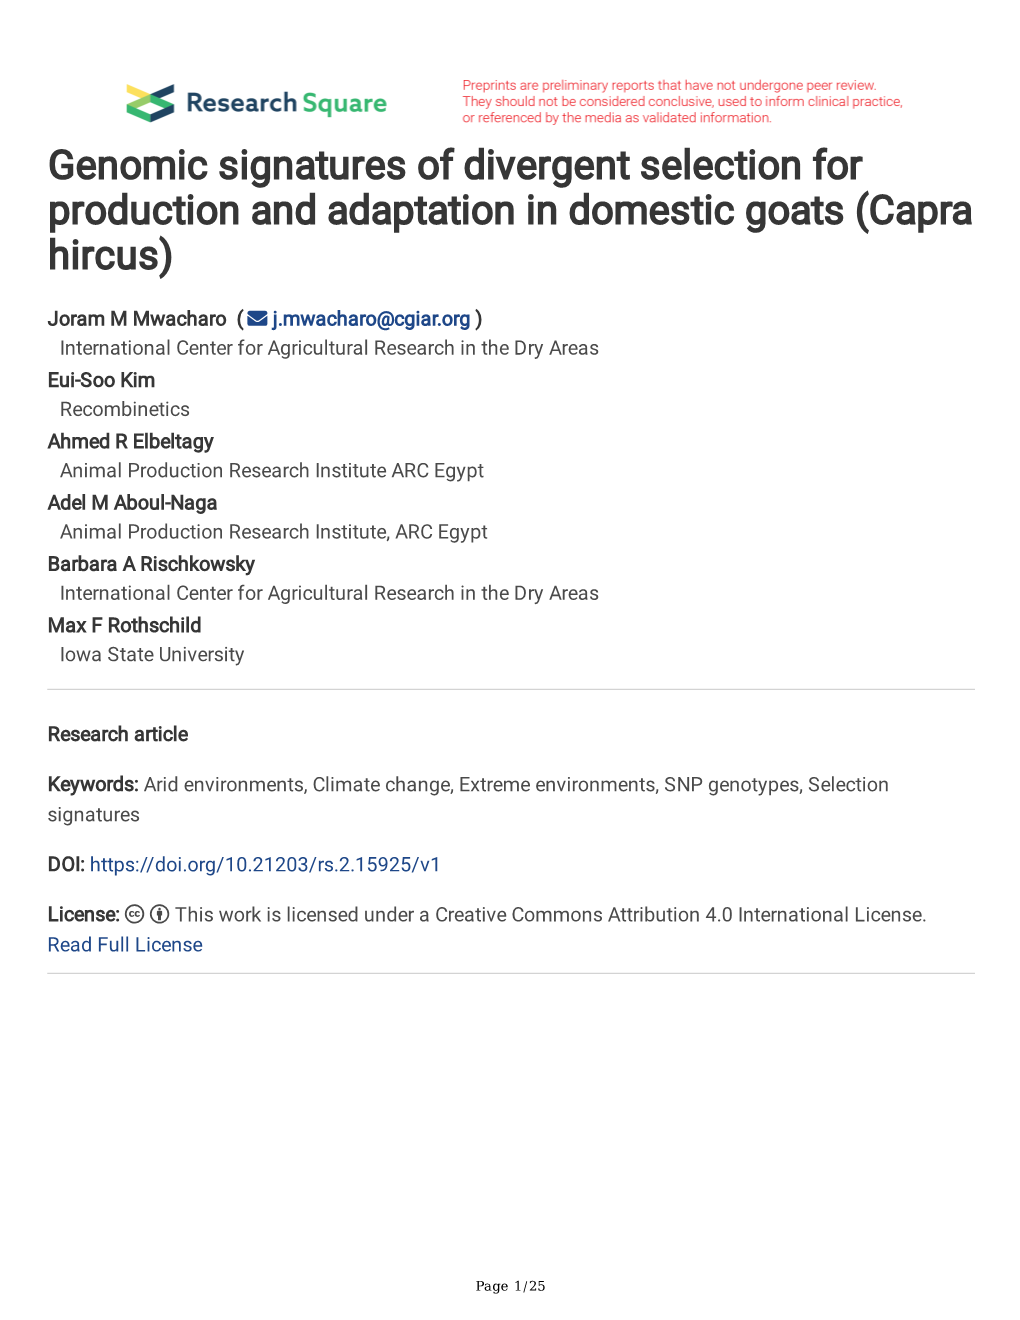 Genomic Signatures of Divergent Selection for Production and Adaptation in Domestic Goats (Capra Hircus)